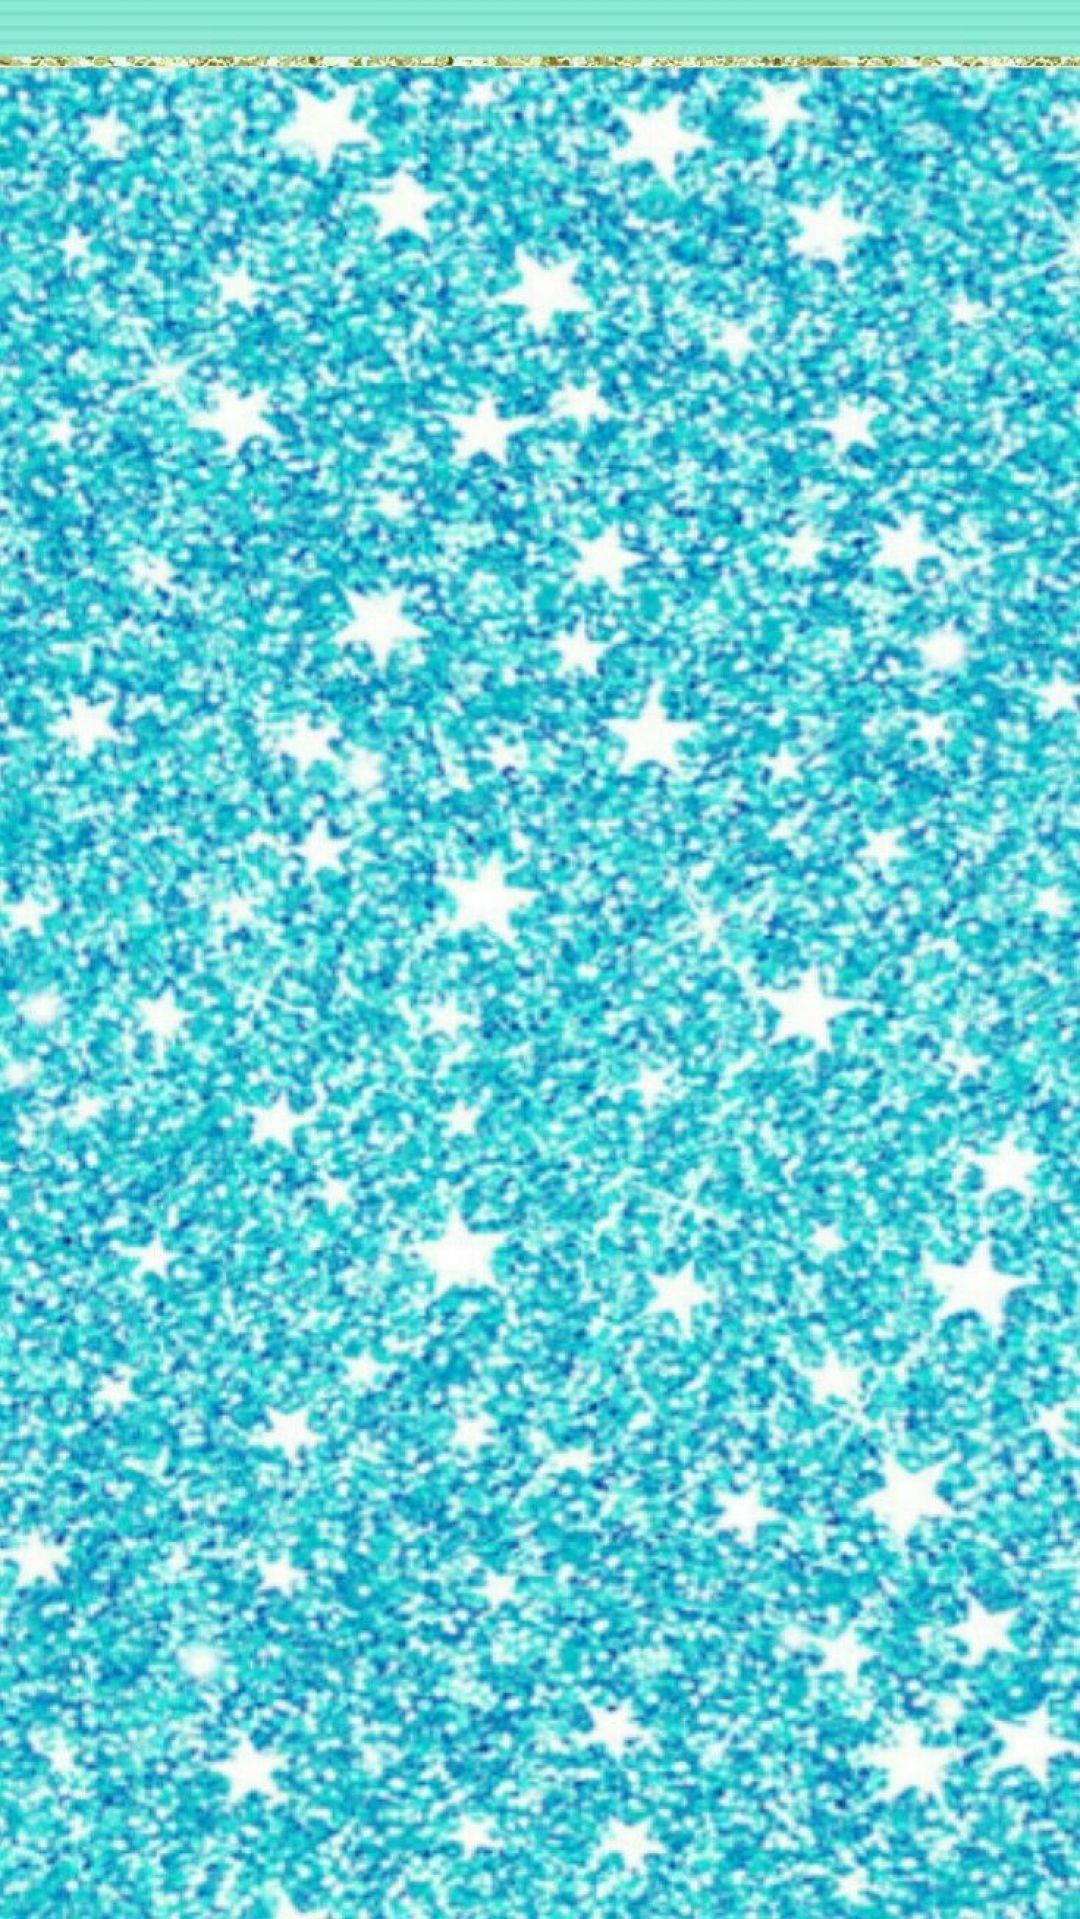 A blue and white background with stars - Cyan